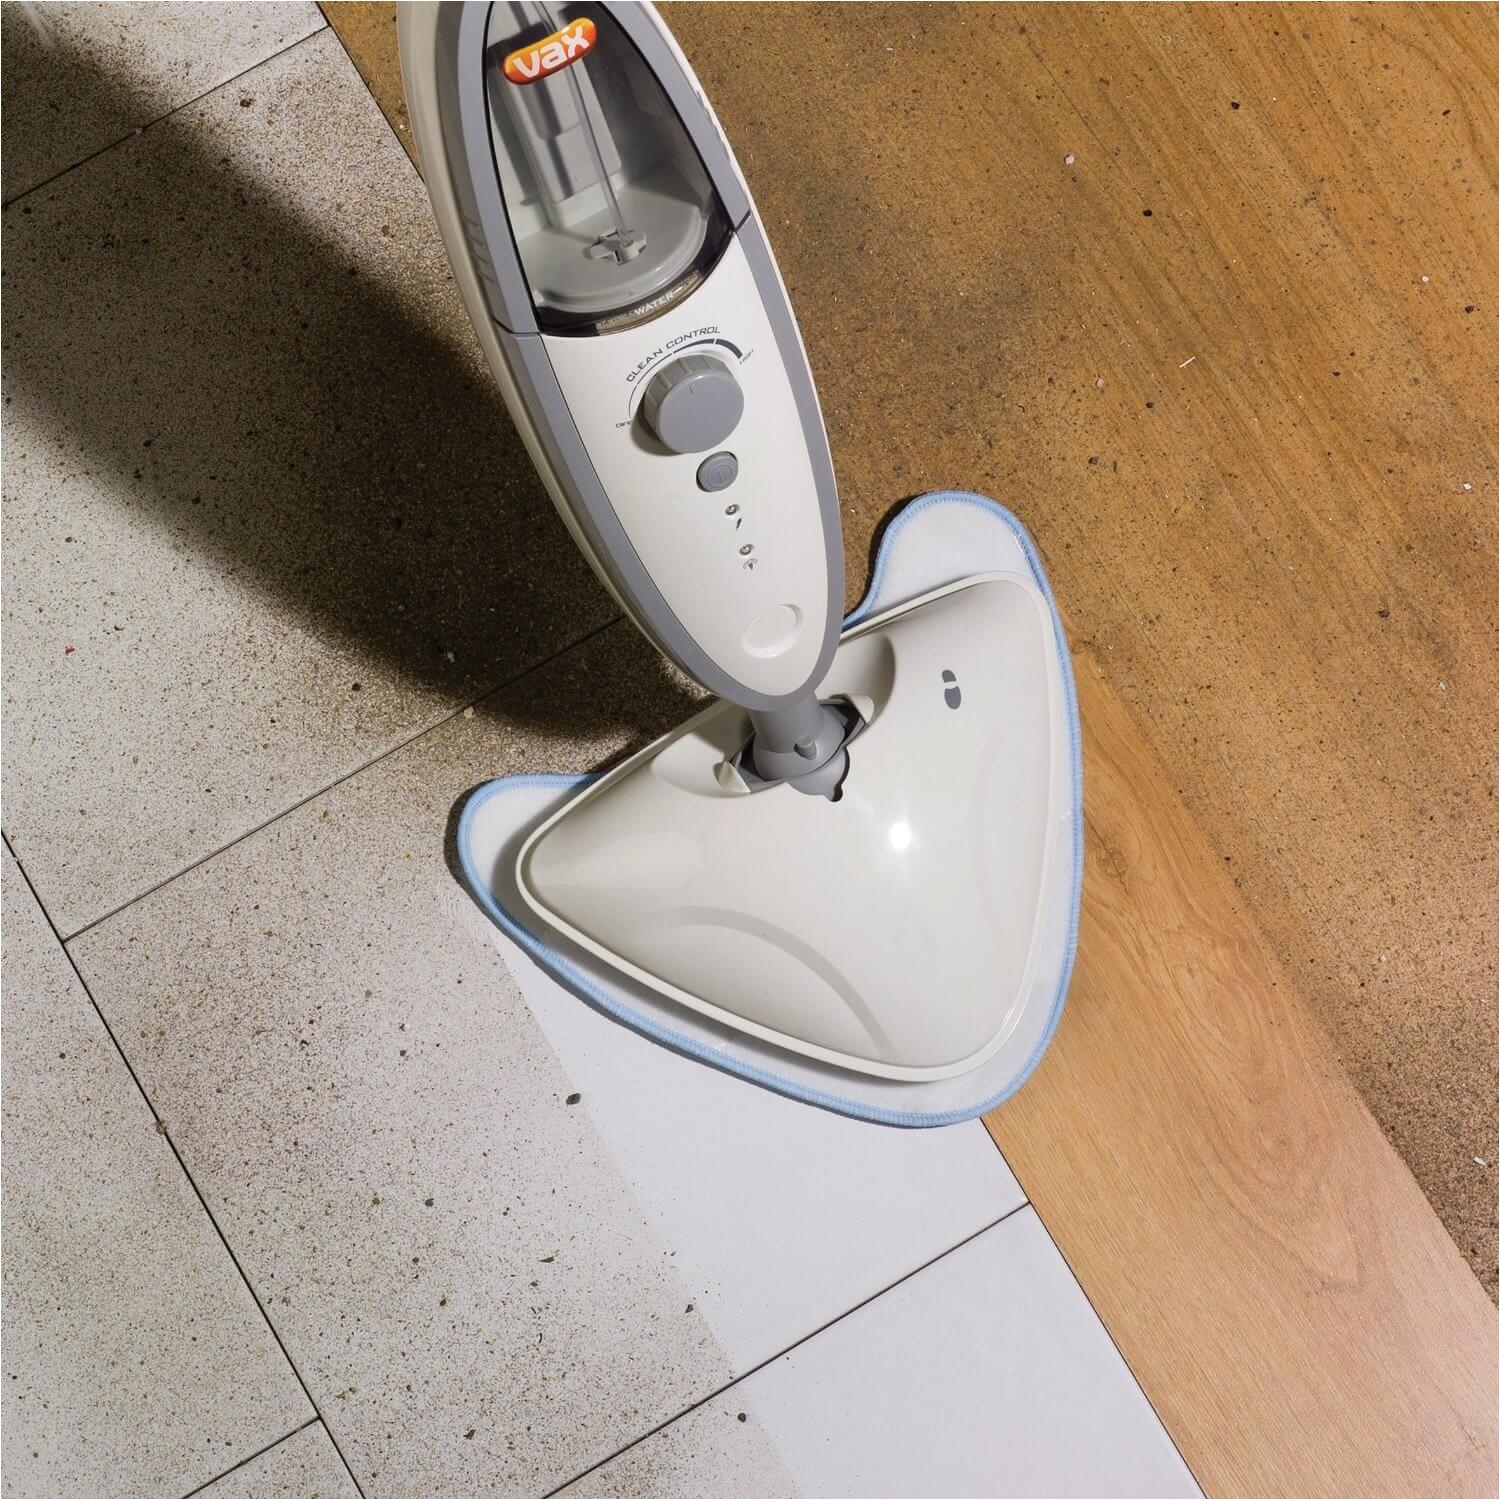 vax s steam mop review perfect for laminate floors floor care reviews full size